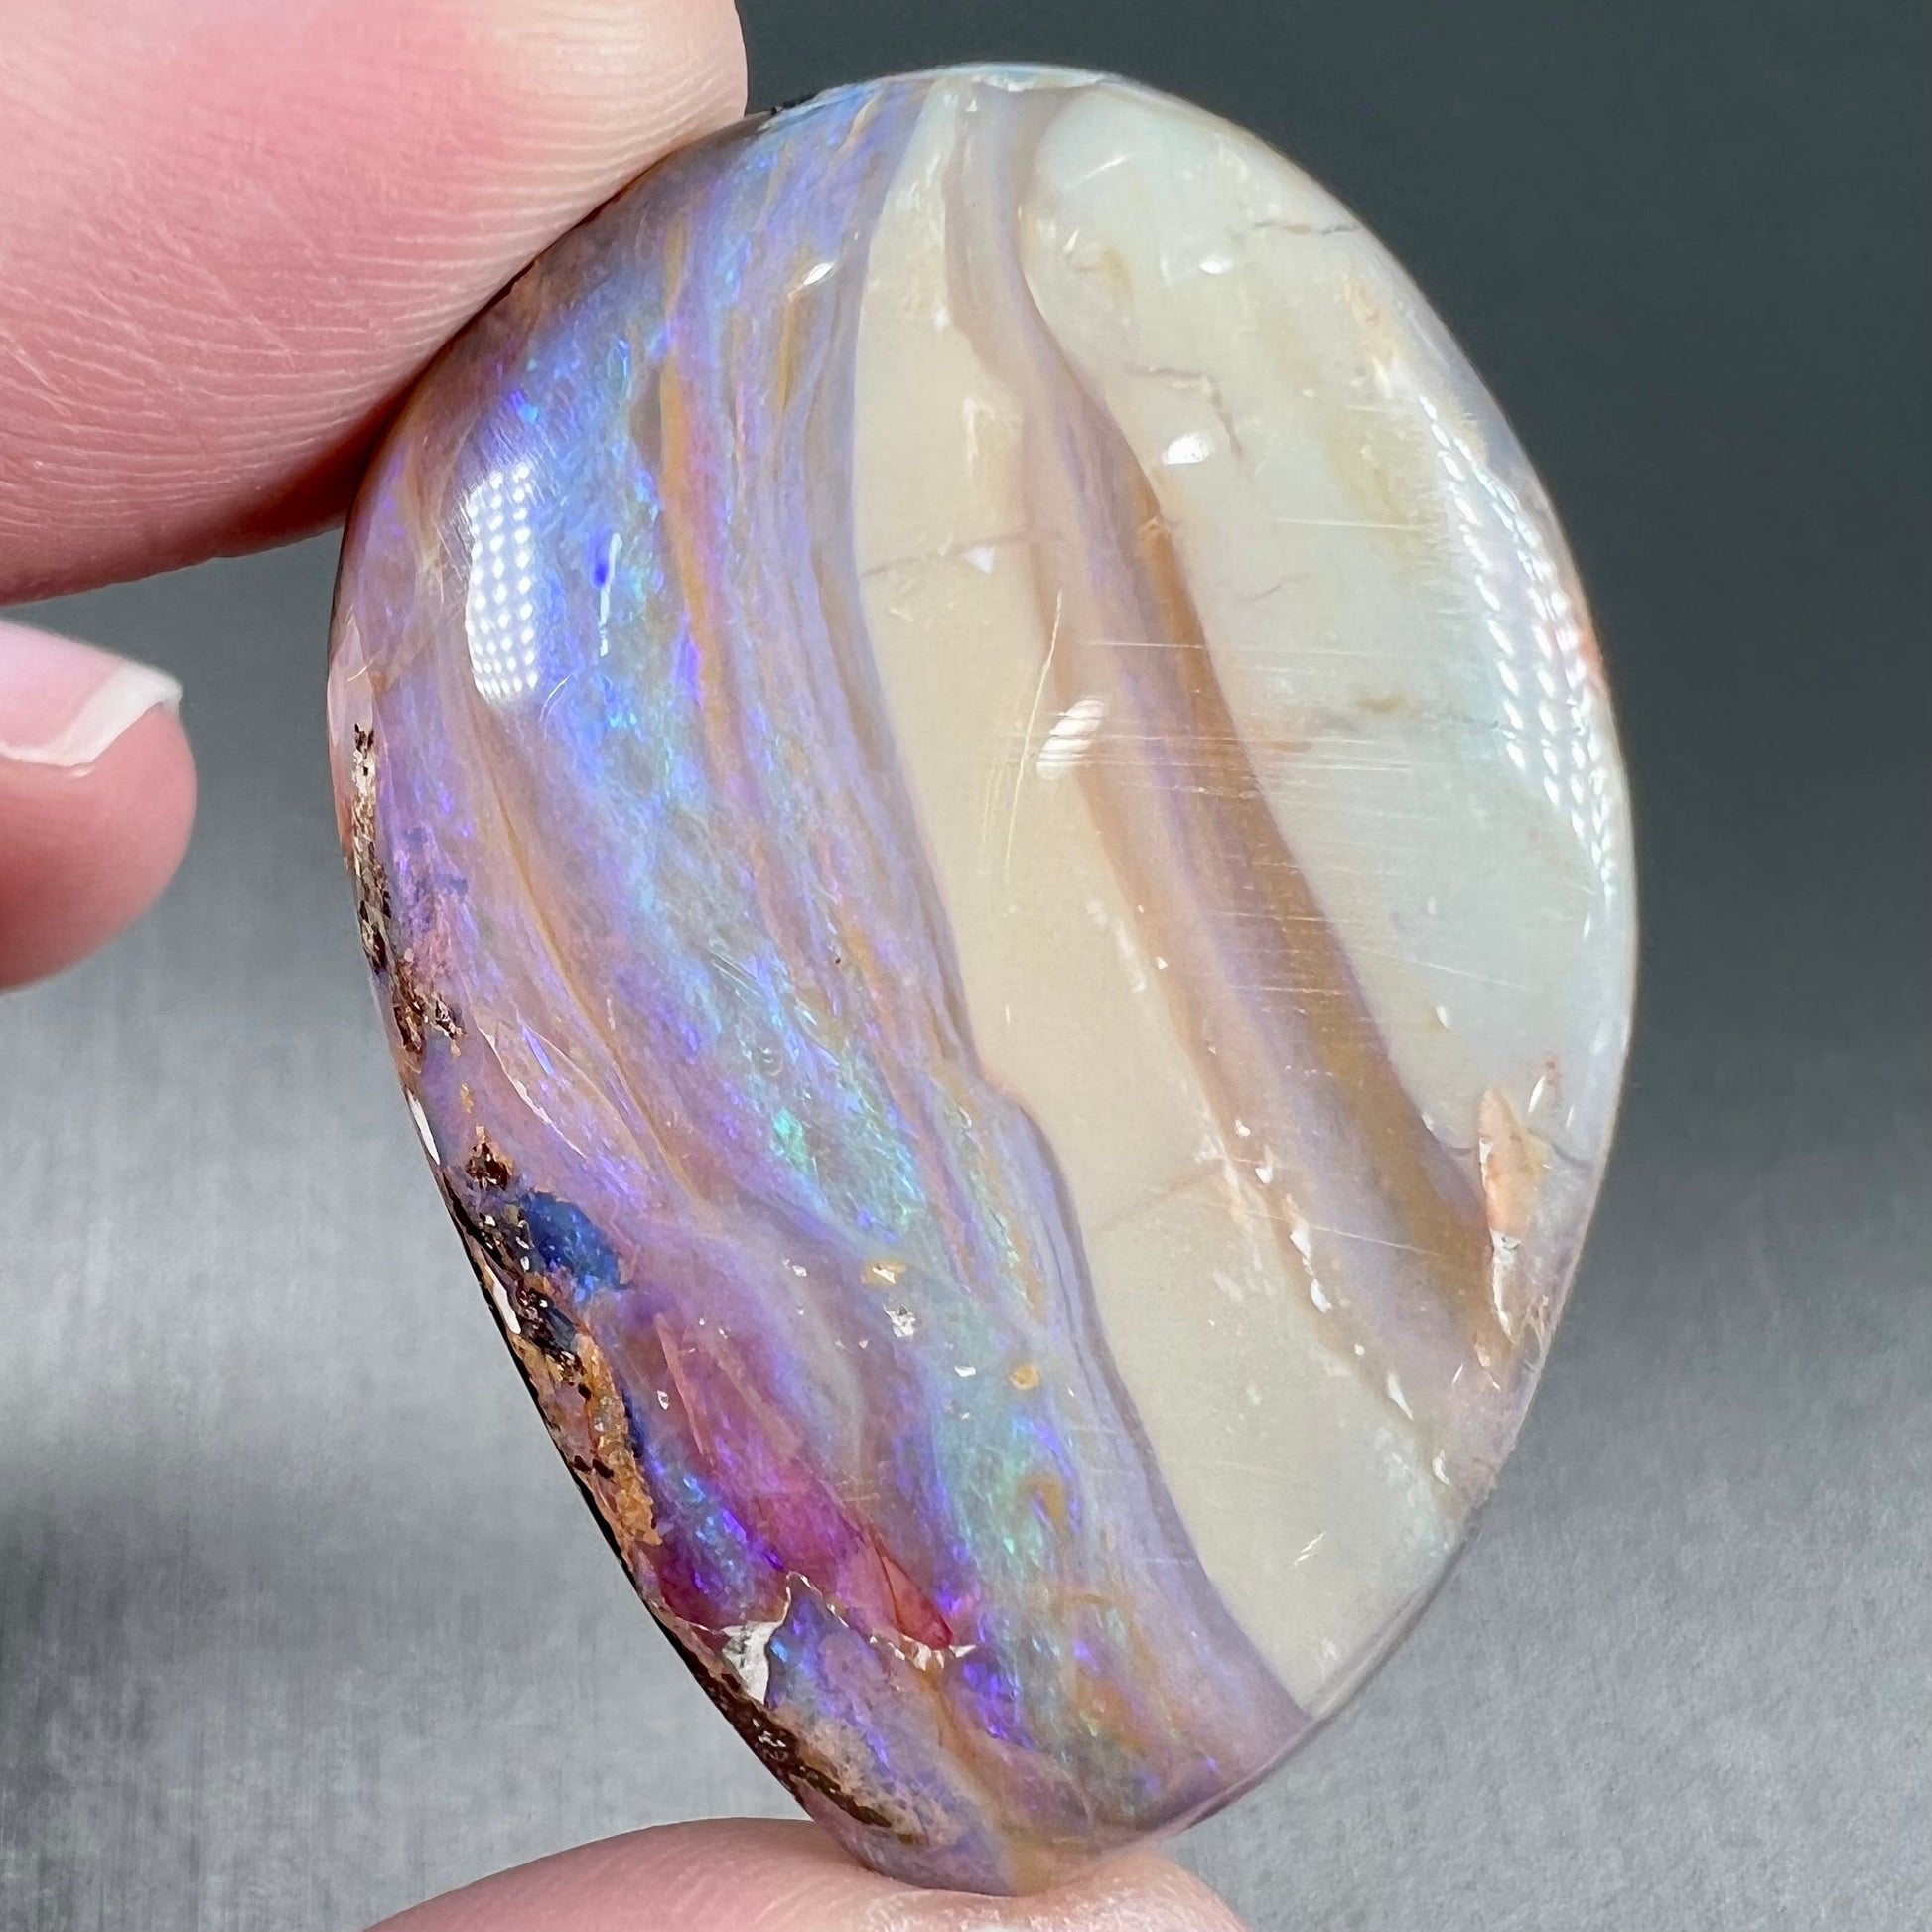 A loose, drop shaped Australian boulder opal from Quilpie Mining District.